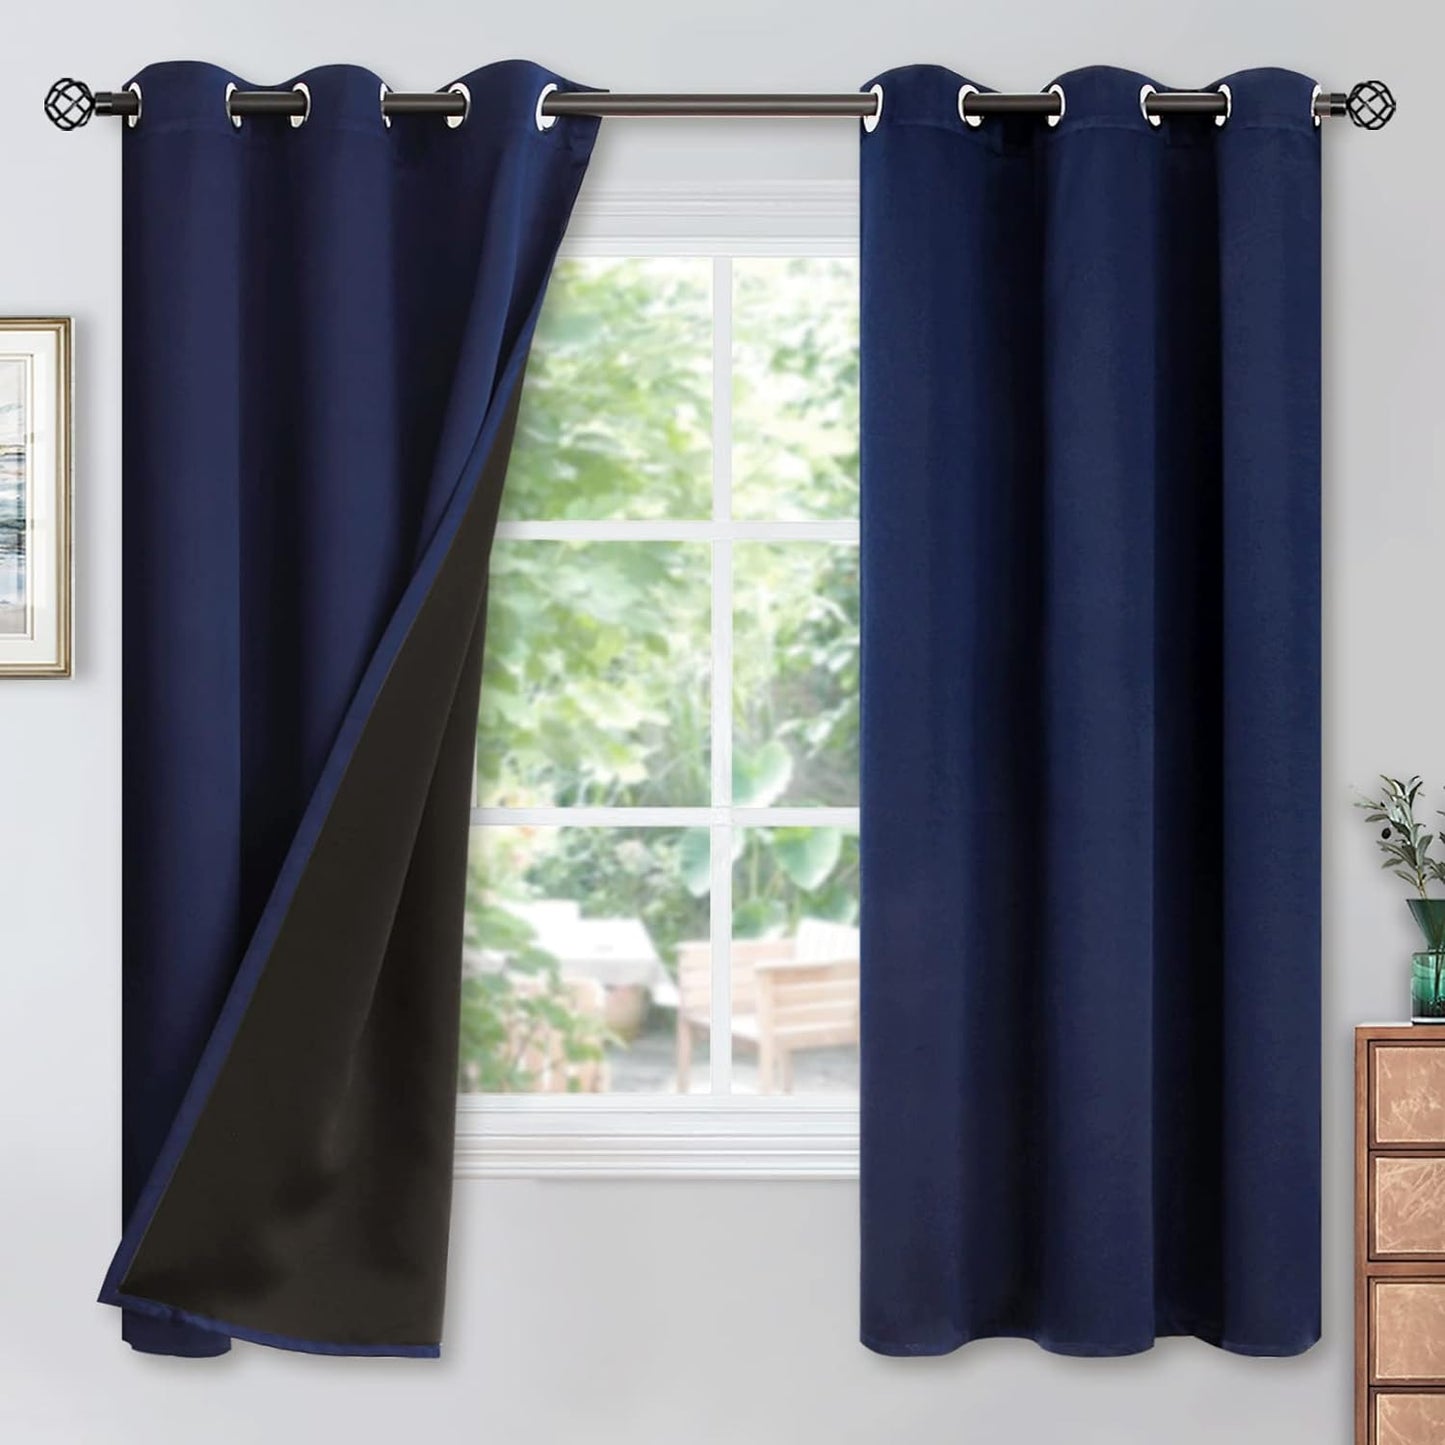 Youngstex Black 100% Blackout Curtains 63 Inches for Bedroom Thermal Insulated Total Room Darkening Curtains for Living Room Window with Black Back Grommet, 2 Panels, 42 X 63 Inch  YoungsTex Navy 42W X 63L 